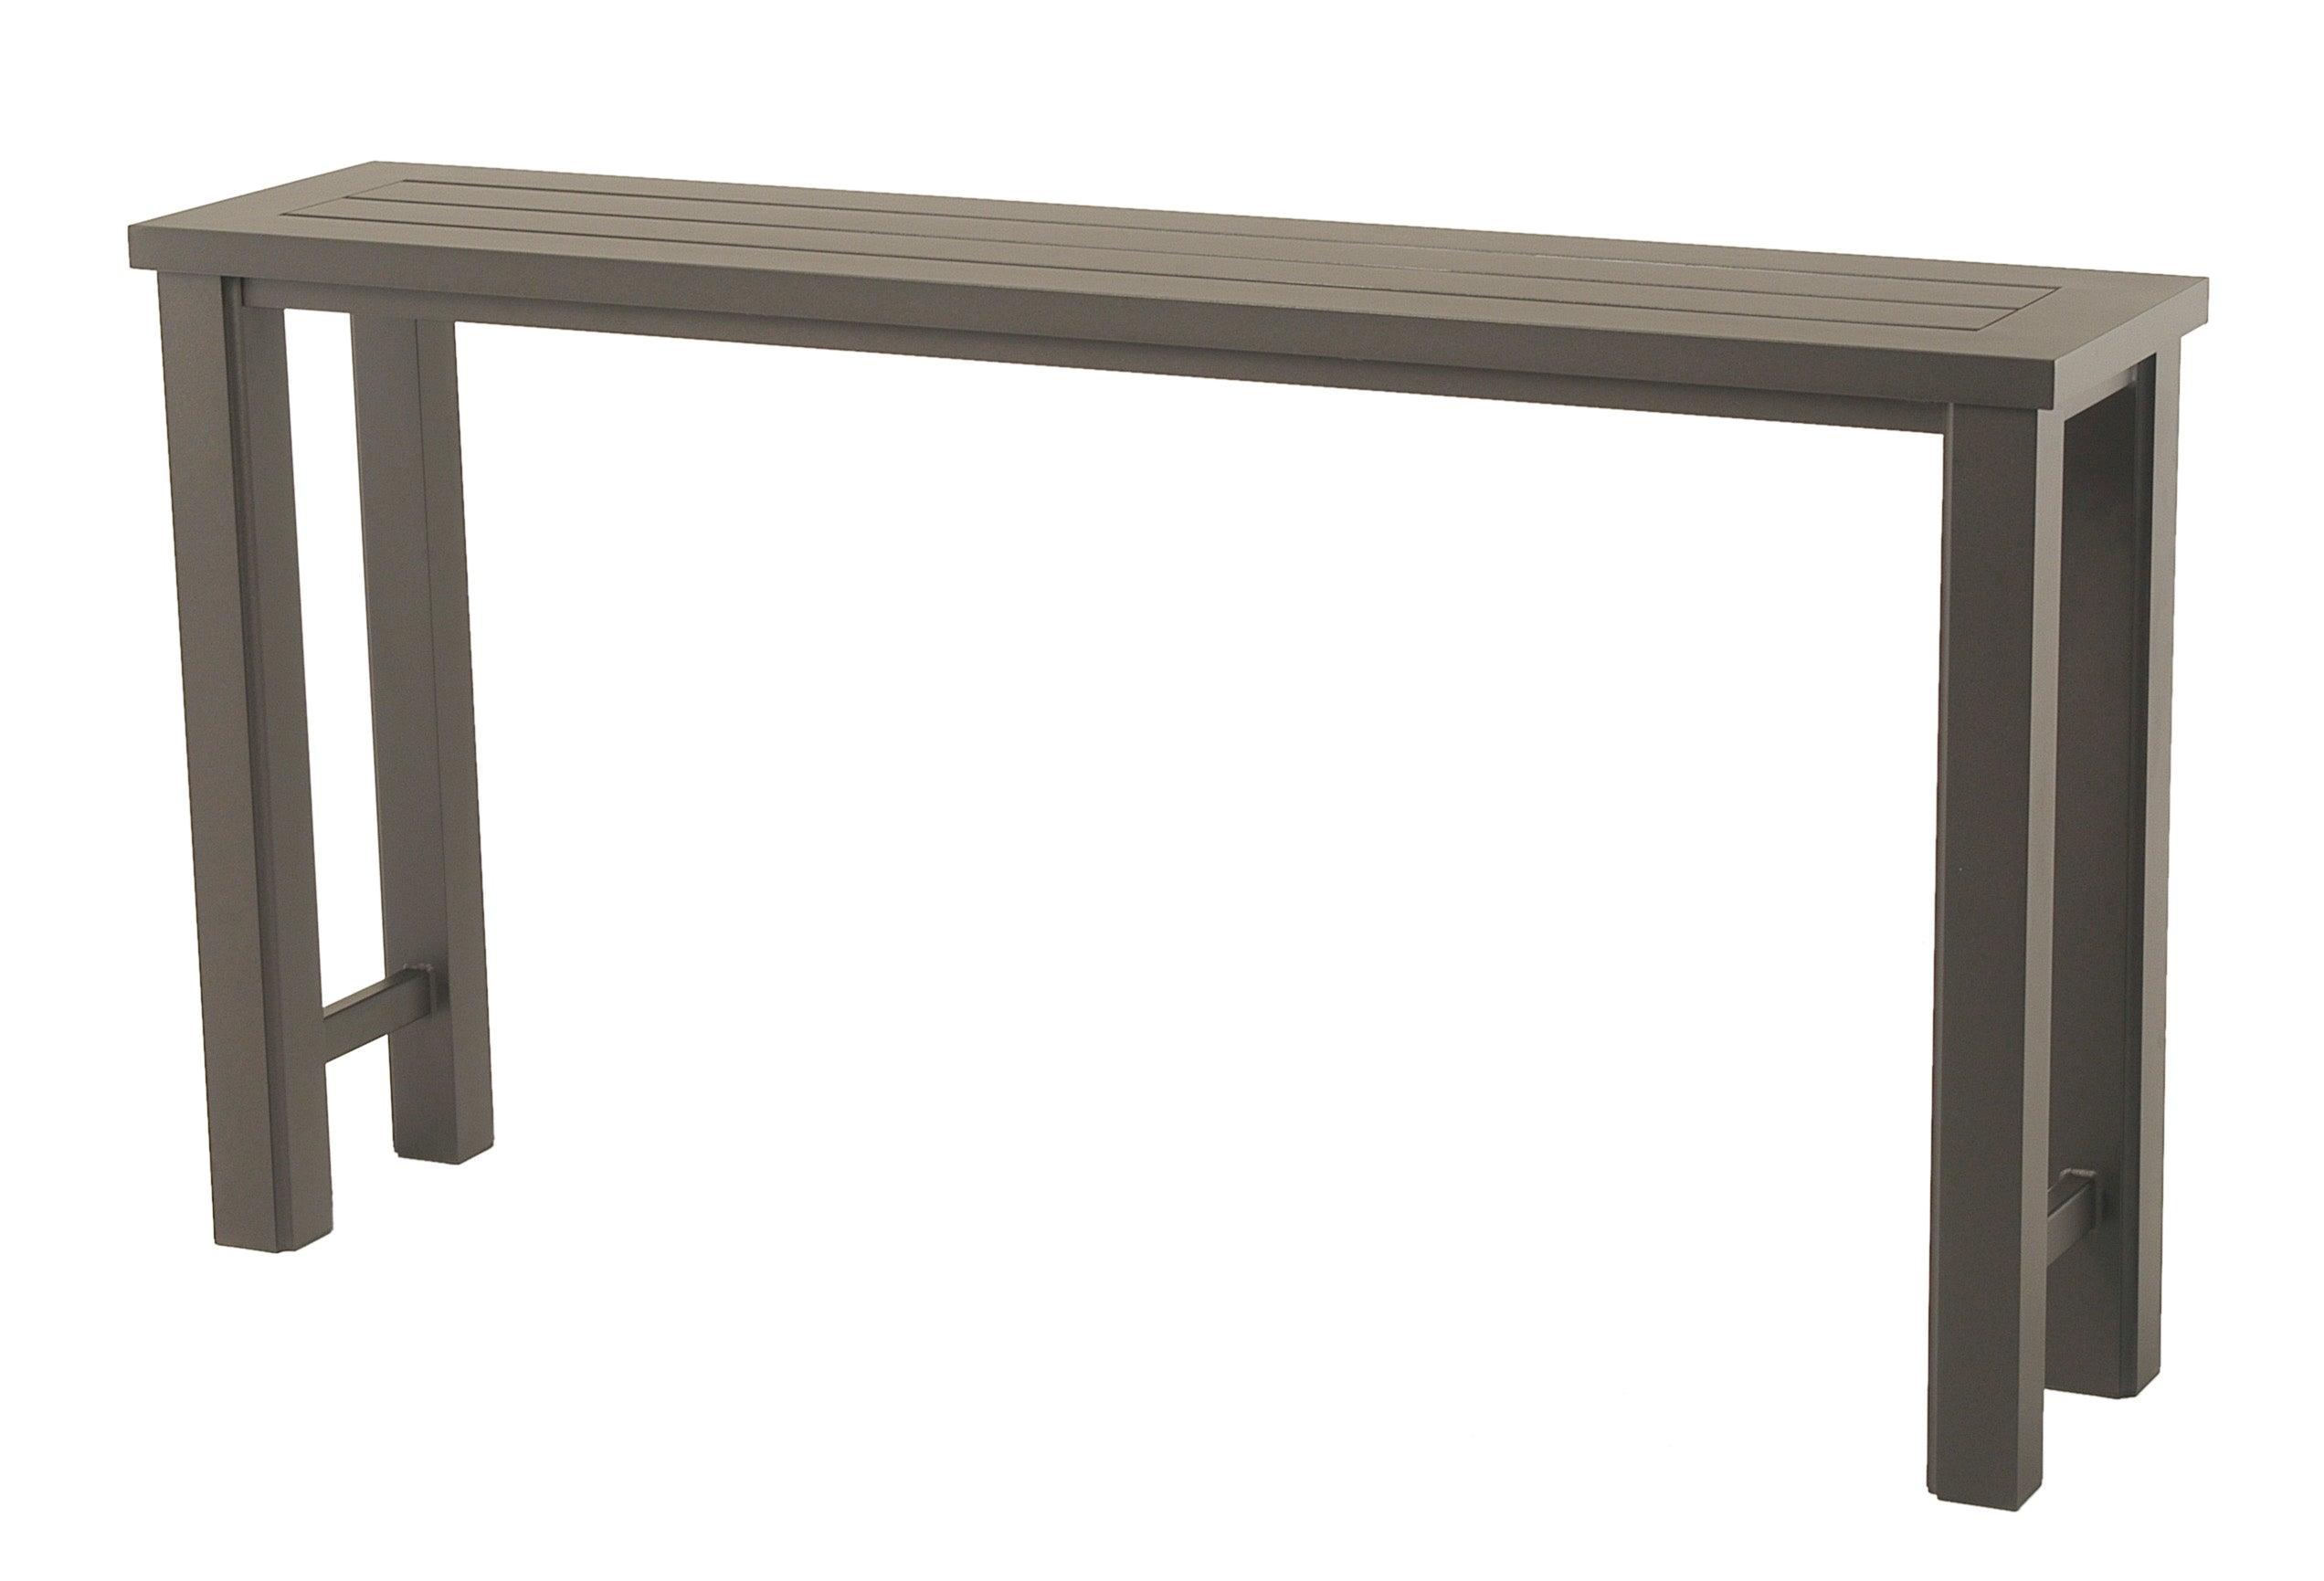 Sherwood 16" x 70" Counter Console Table by Hanamint